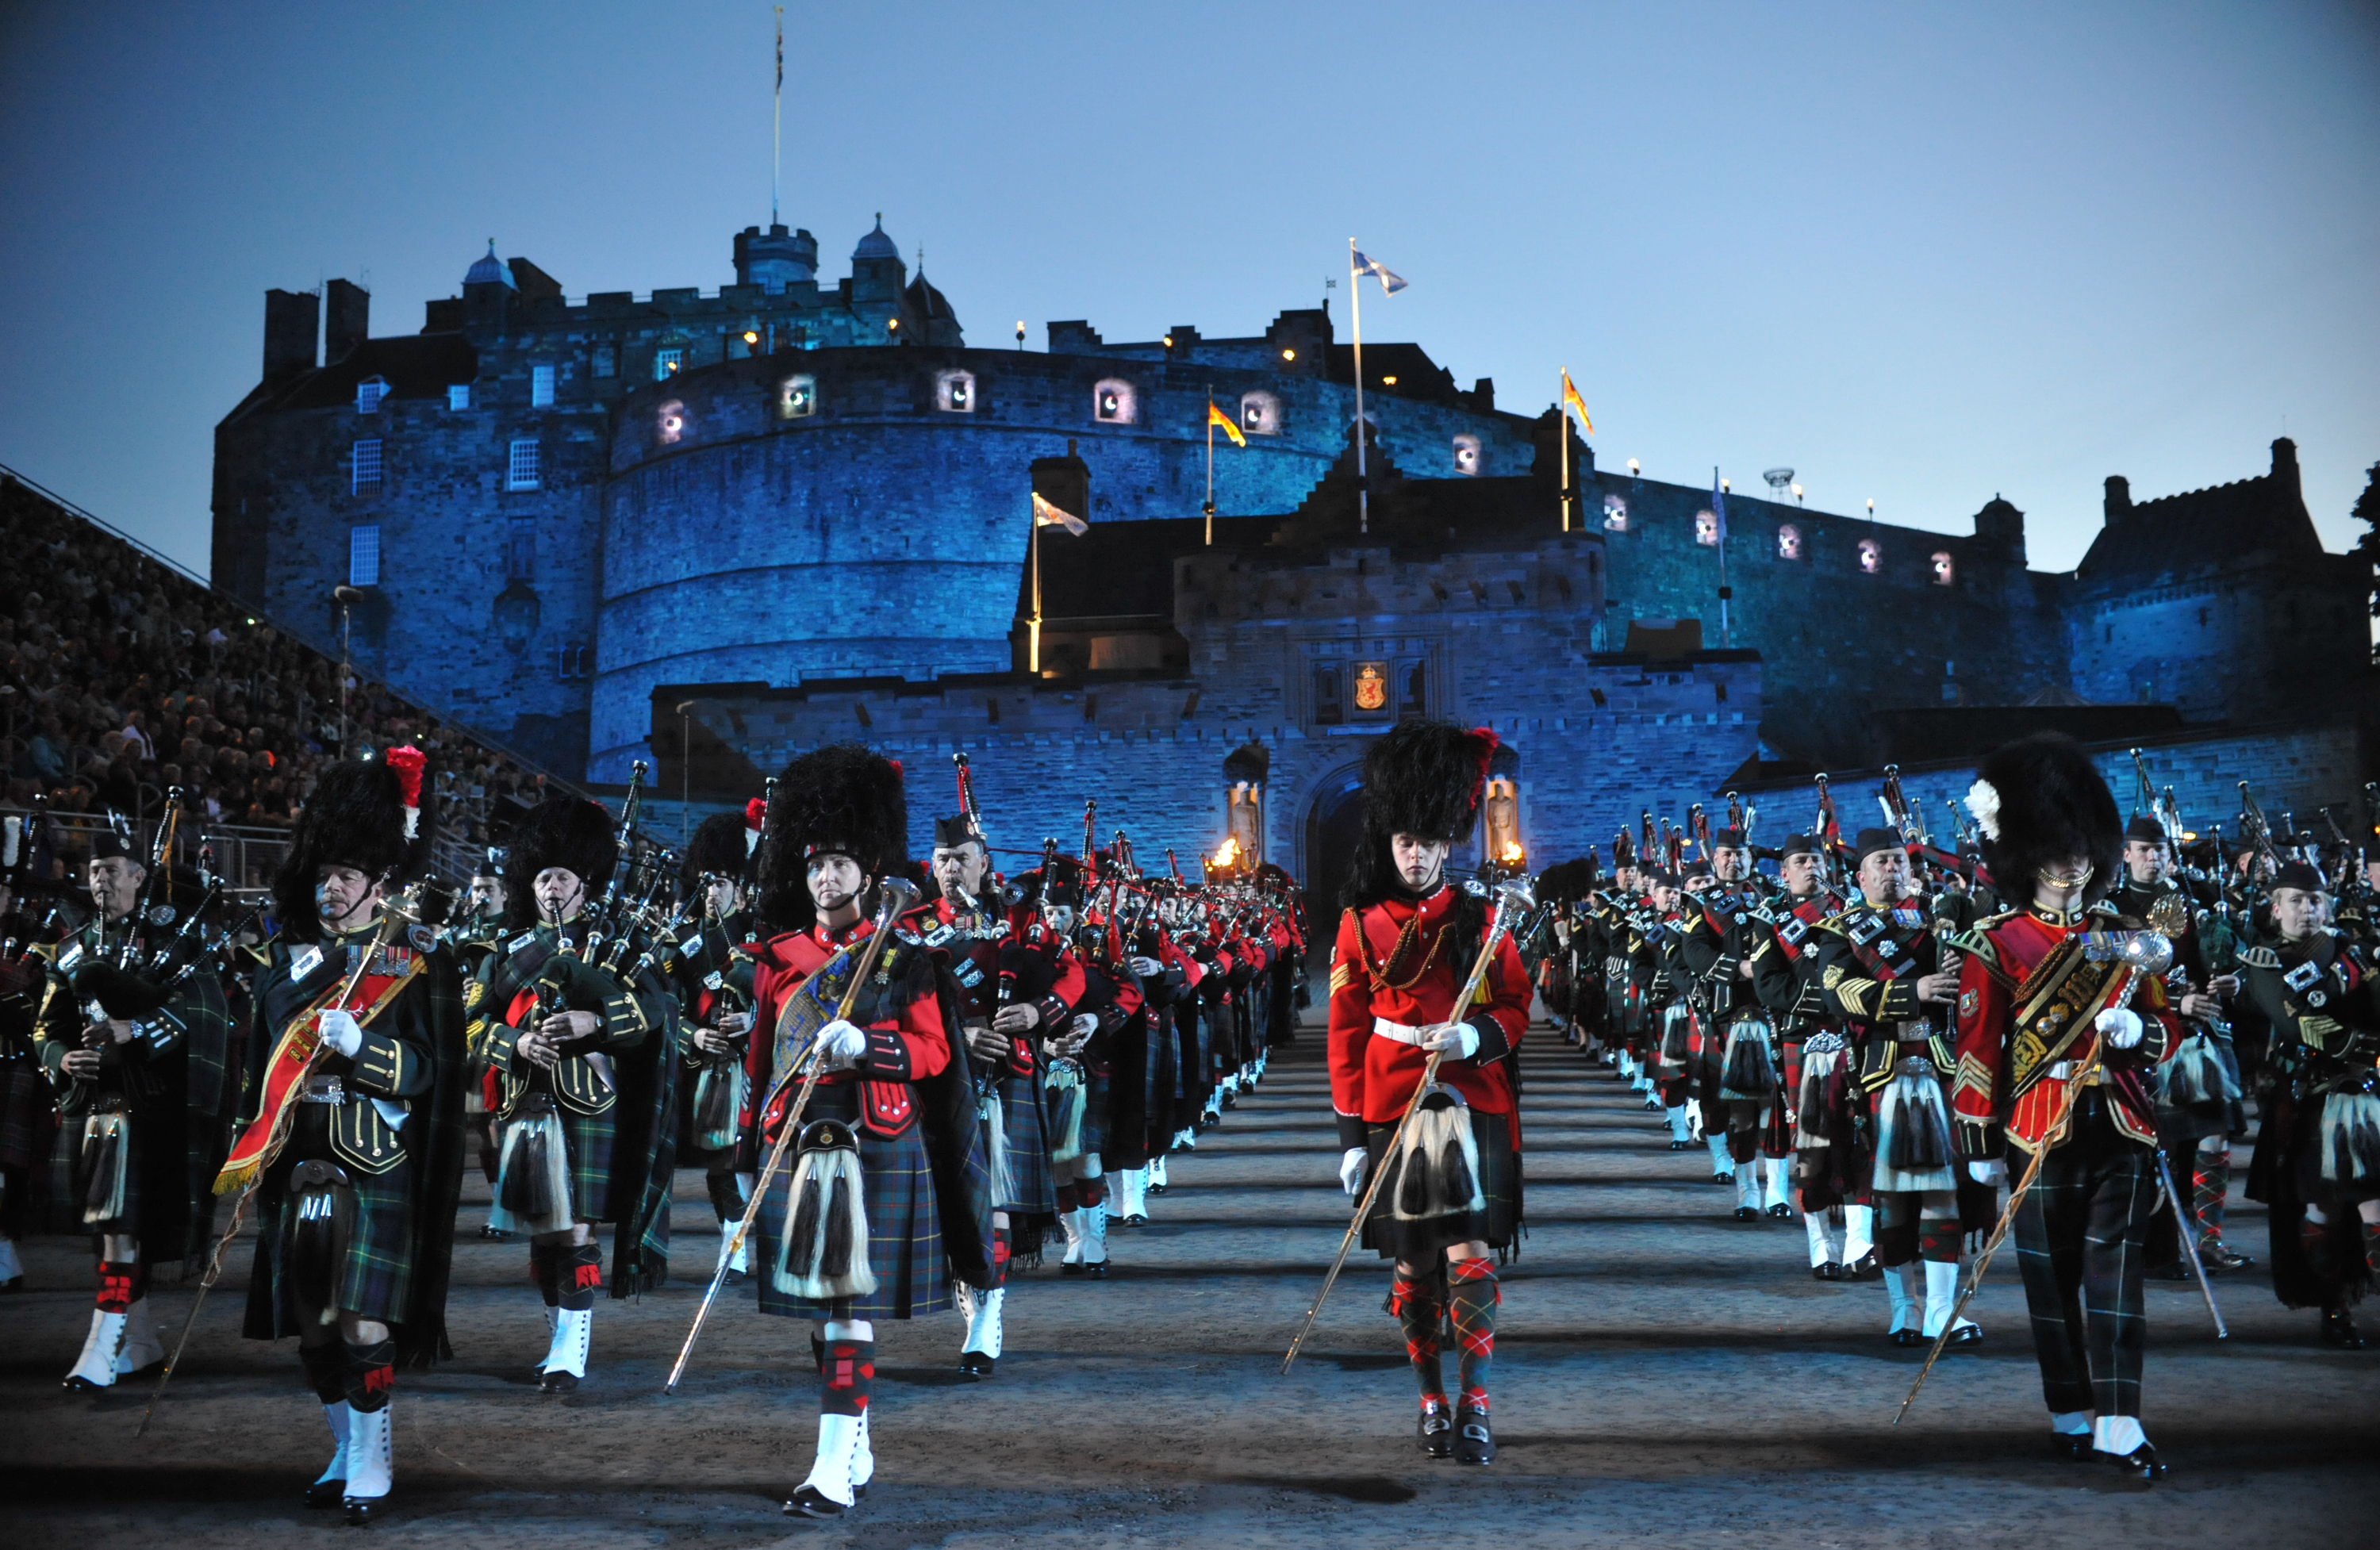 Elements will feature from the Royal Edinburgh Military Tattoo